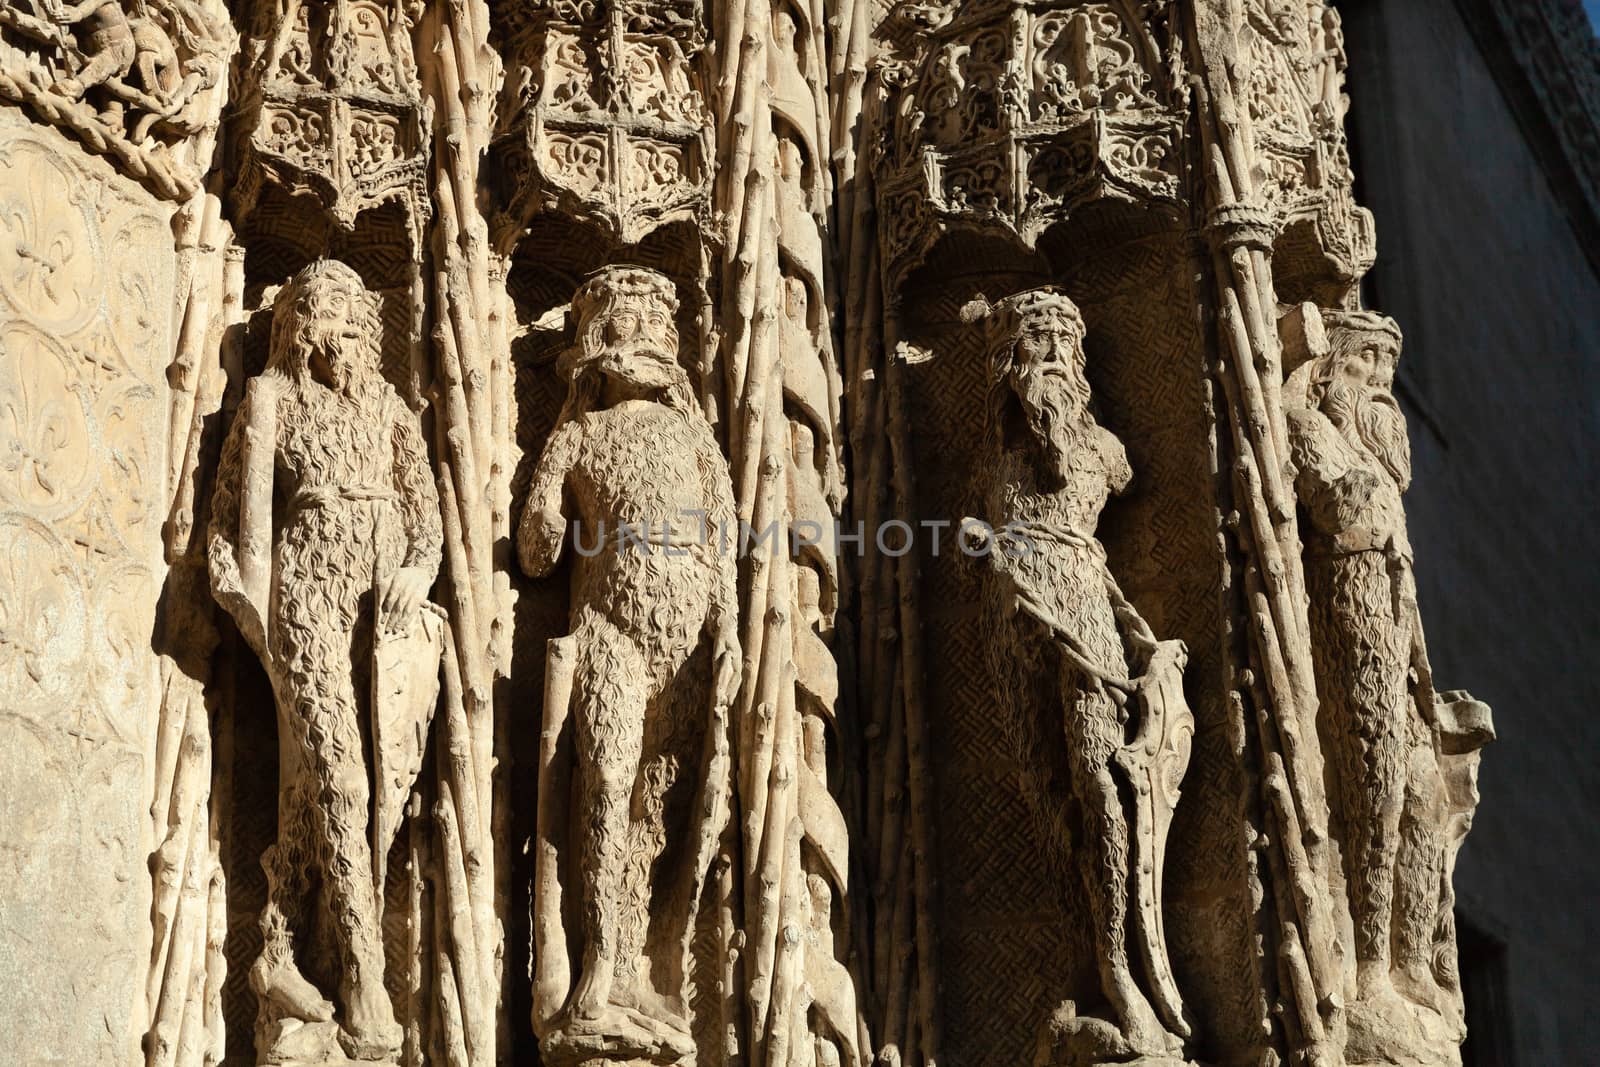 Valladolid, Spain - 9 December 2018: National Sculpture Museum, close-up view of the statues on main facade